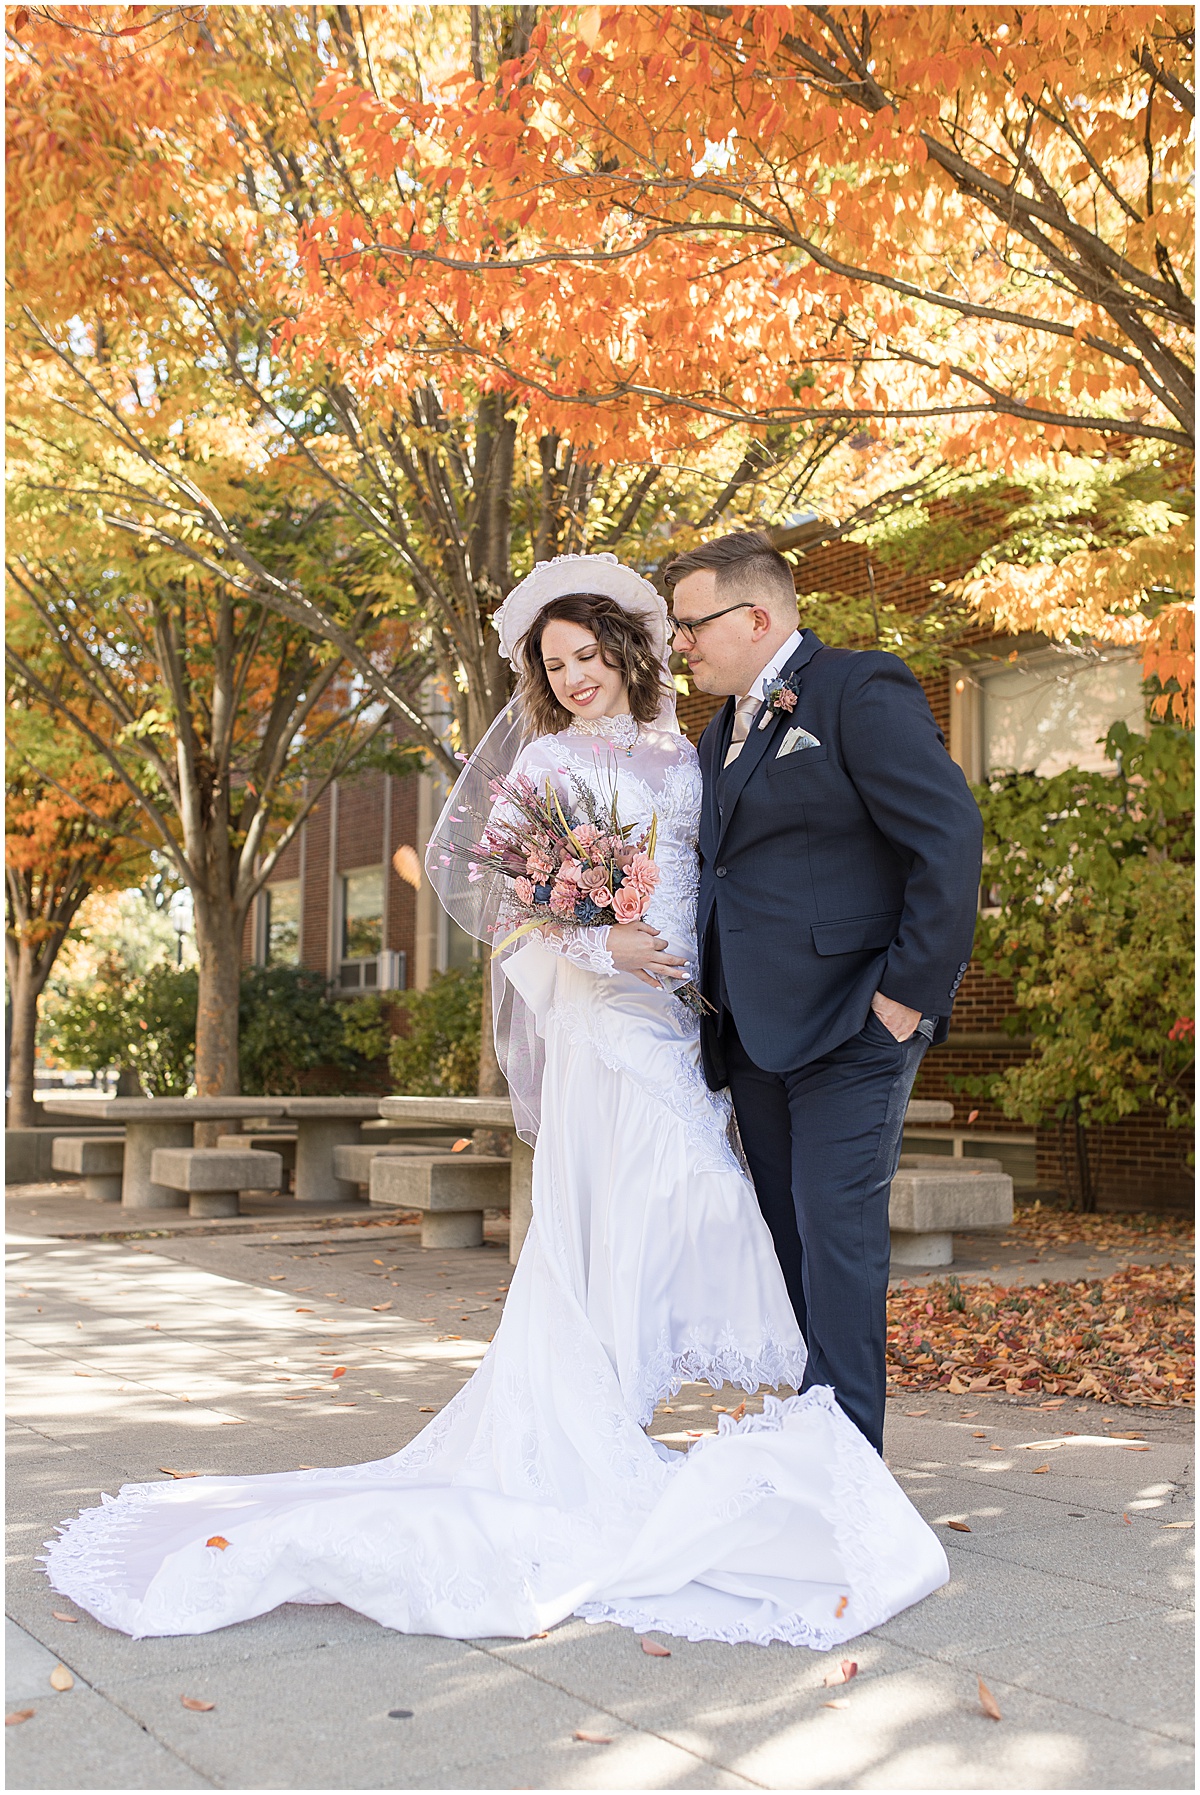 Bride and groom next to orange fall leaves at wedding at St. Thomas Aquina Church in West Lafayette, Indiana